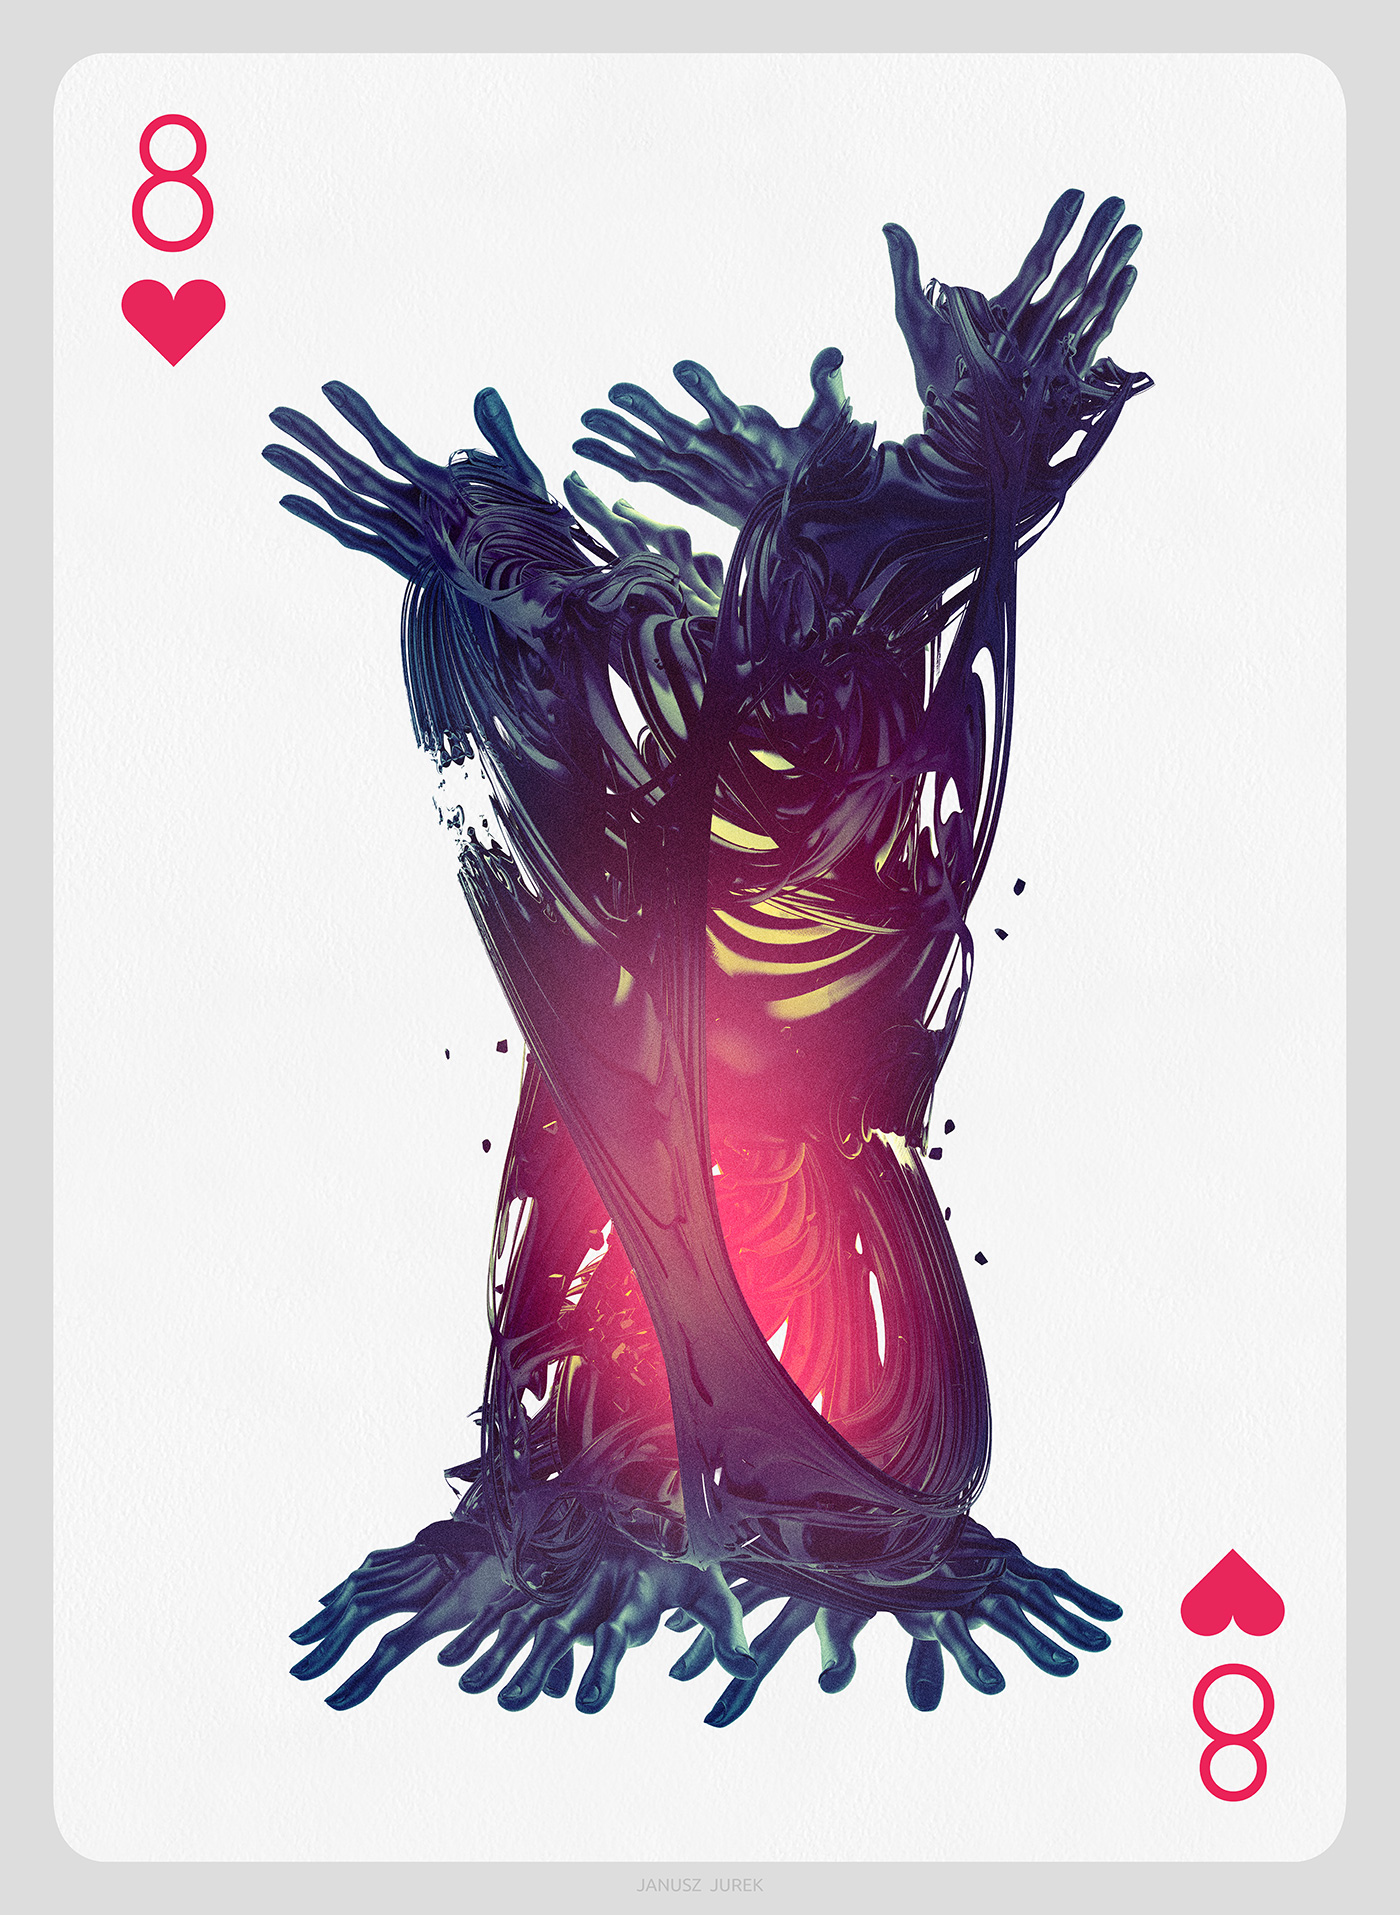 Cards_Hearts_8